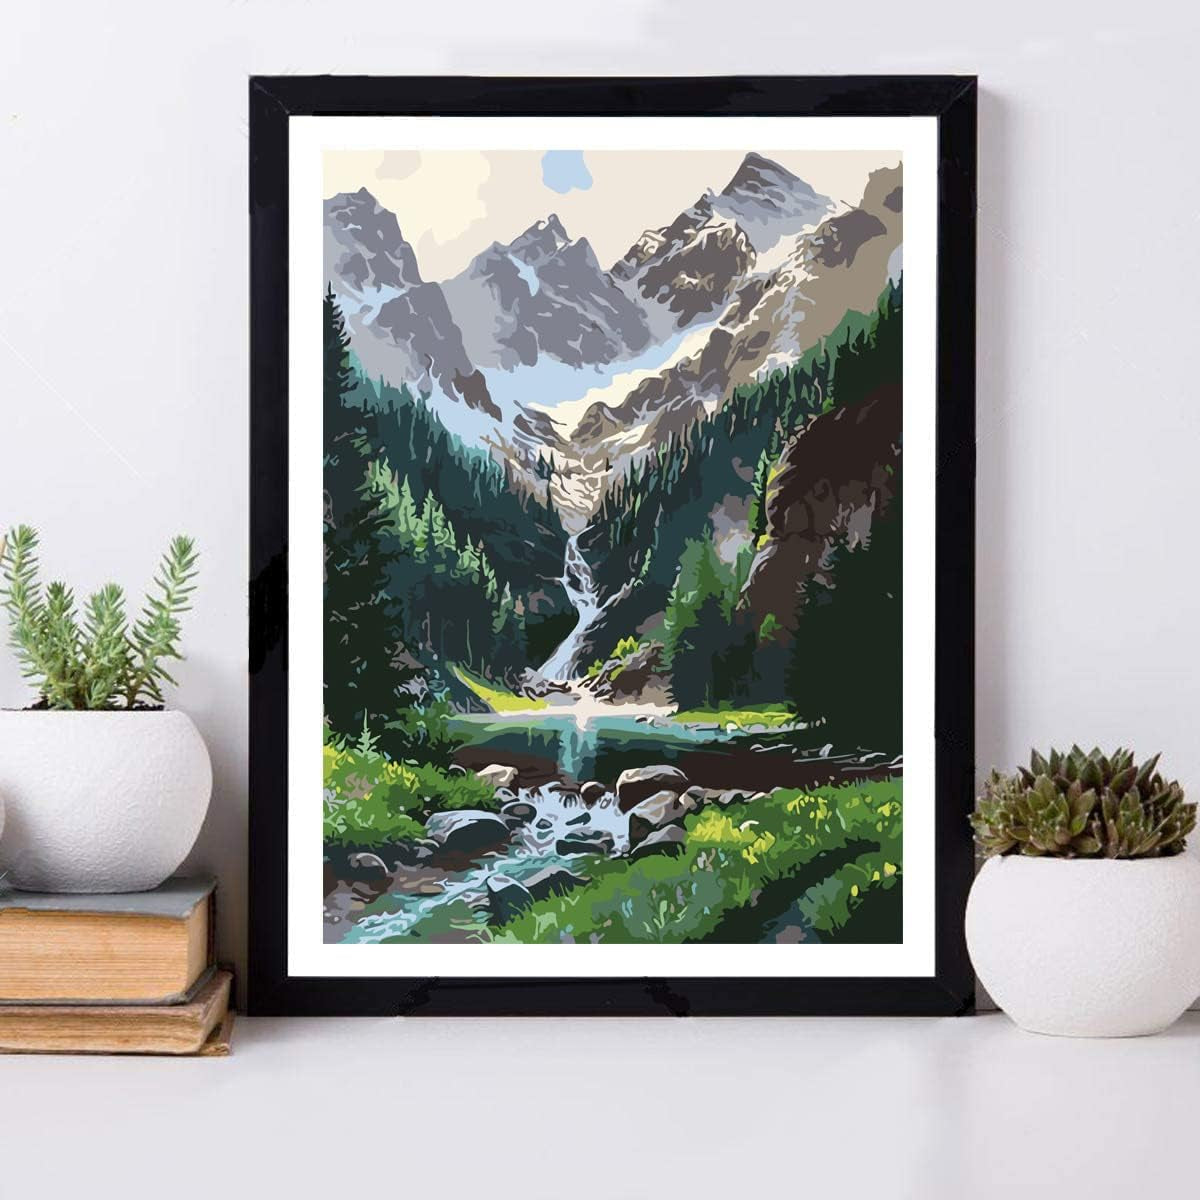 Paint by Number Mountains Waterfall DIY Painting on Canvas, Paintwork with Paintbrushes Acrylic Paints,Perfect for Paint by Numbers for Adults and Kids Students Beginner, for Home Wall Decor16X20 Inch